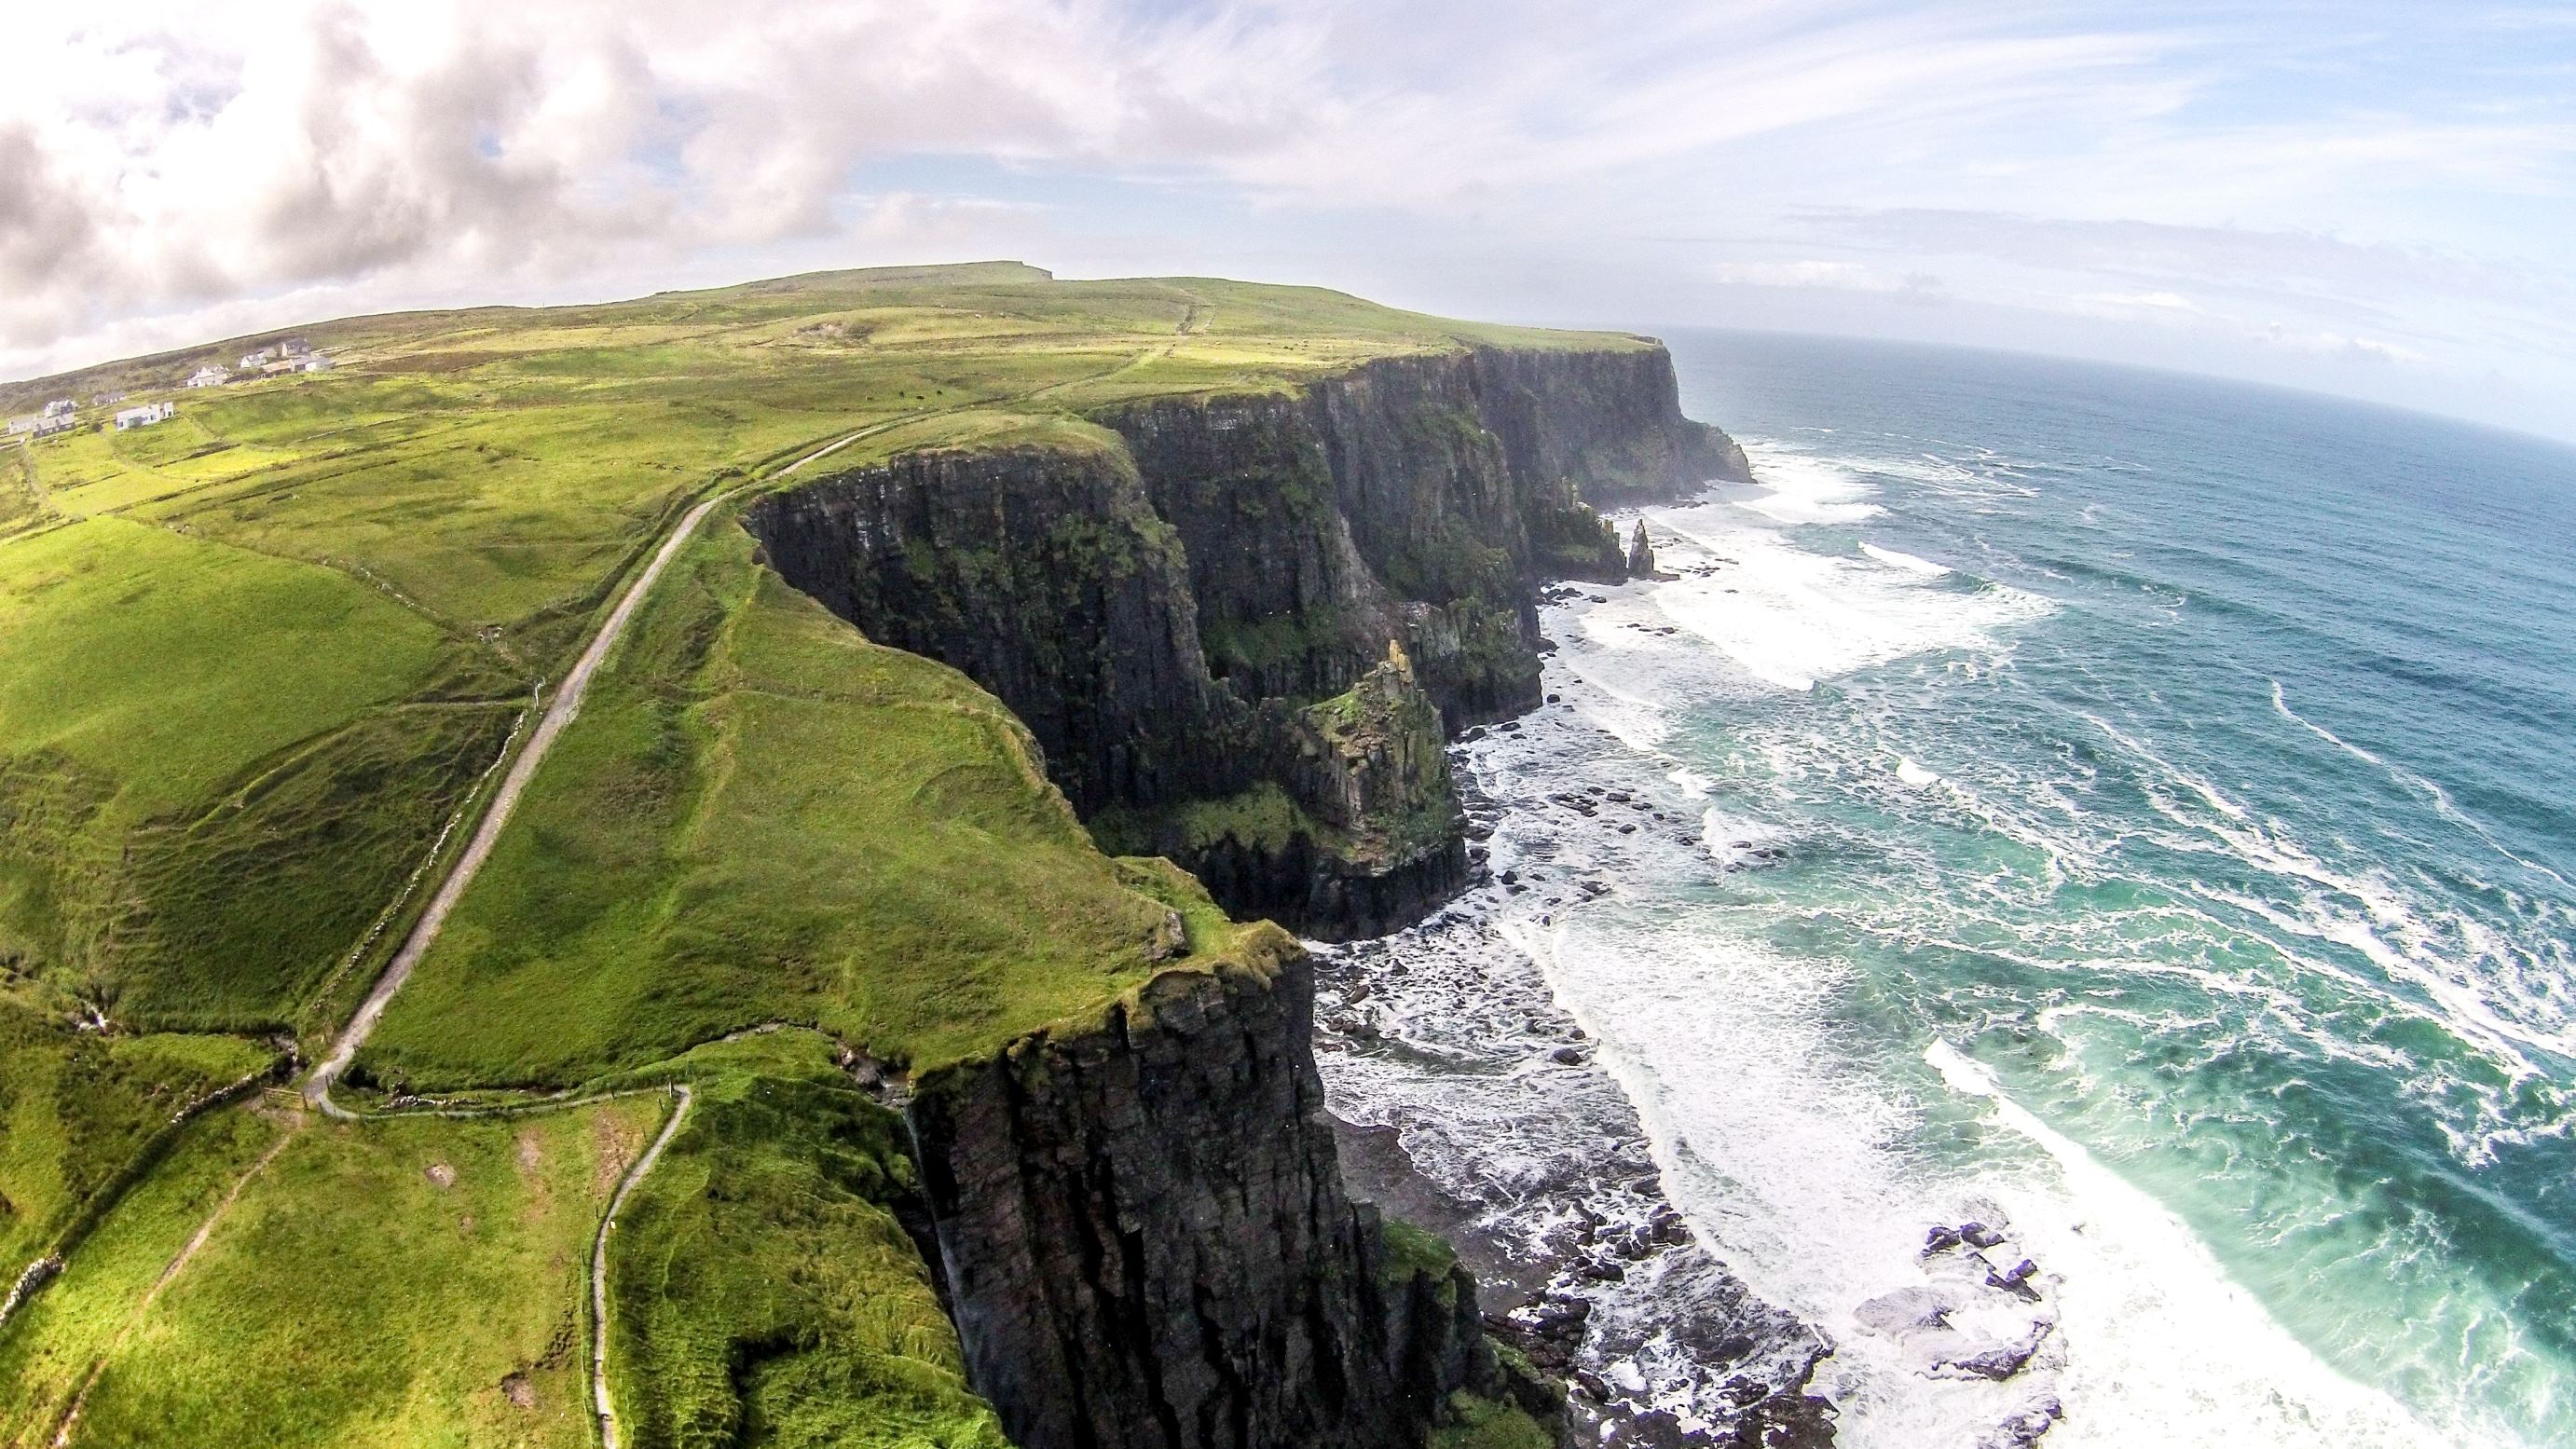 Slide 37 of 41: A couple have captured a series of striking drone images of Ireland. Martin and Caro quit their jobs and decided to travel round the world. They took their honeymoon in Ireland in June 2015 and captured a series of stunning drone images of rugged coastlines, hills and even the castle where Game of Thrones was previously filmed.